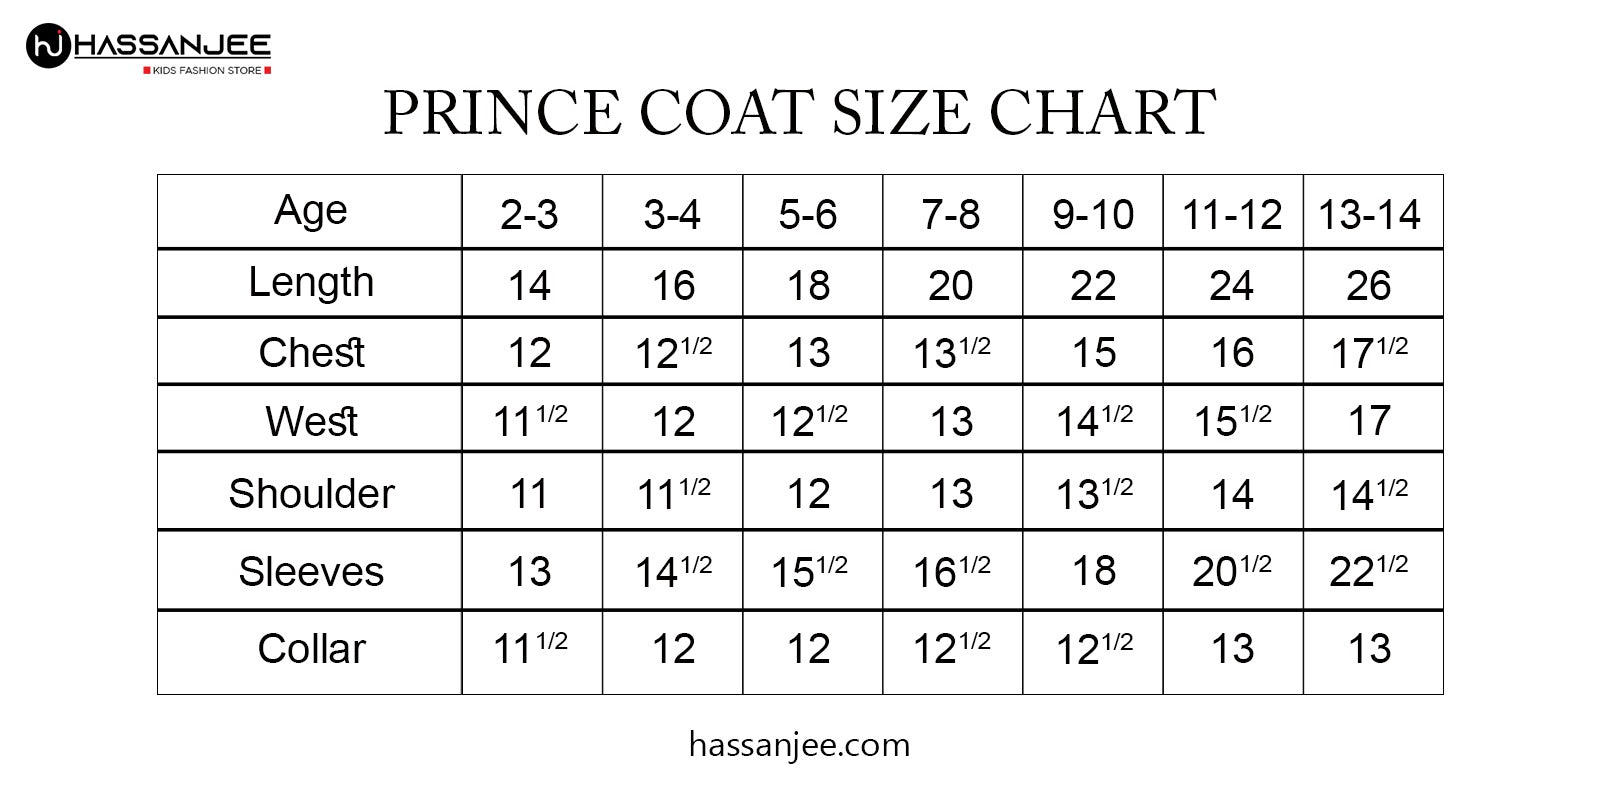 Offwhite Prince coat - P7